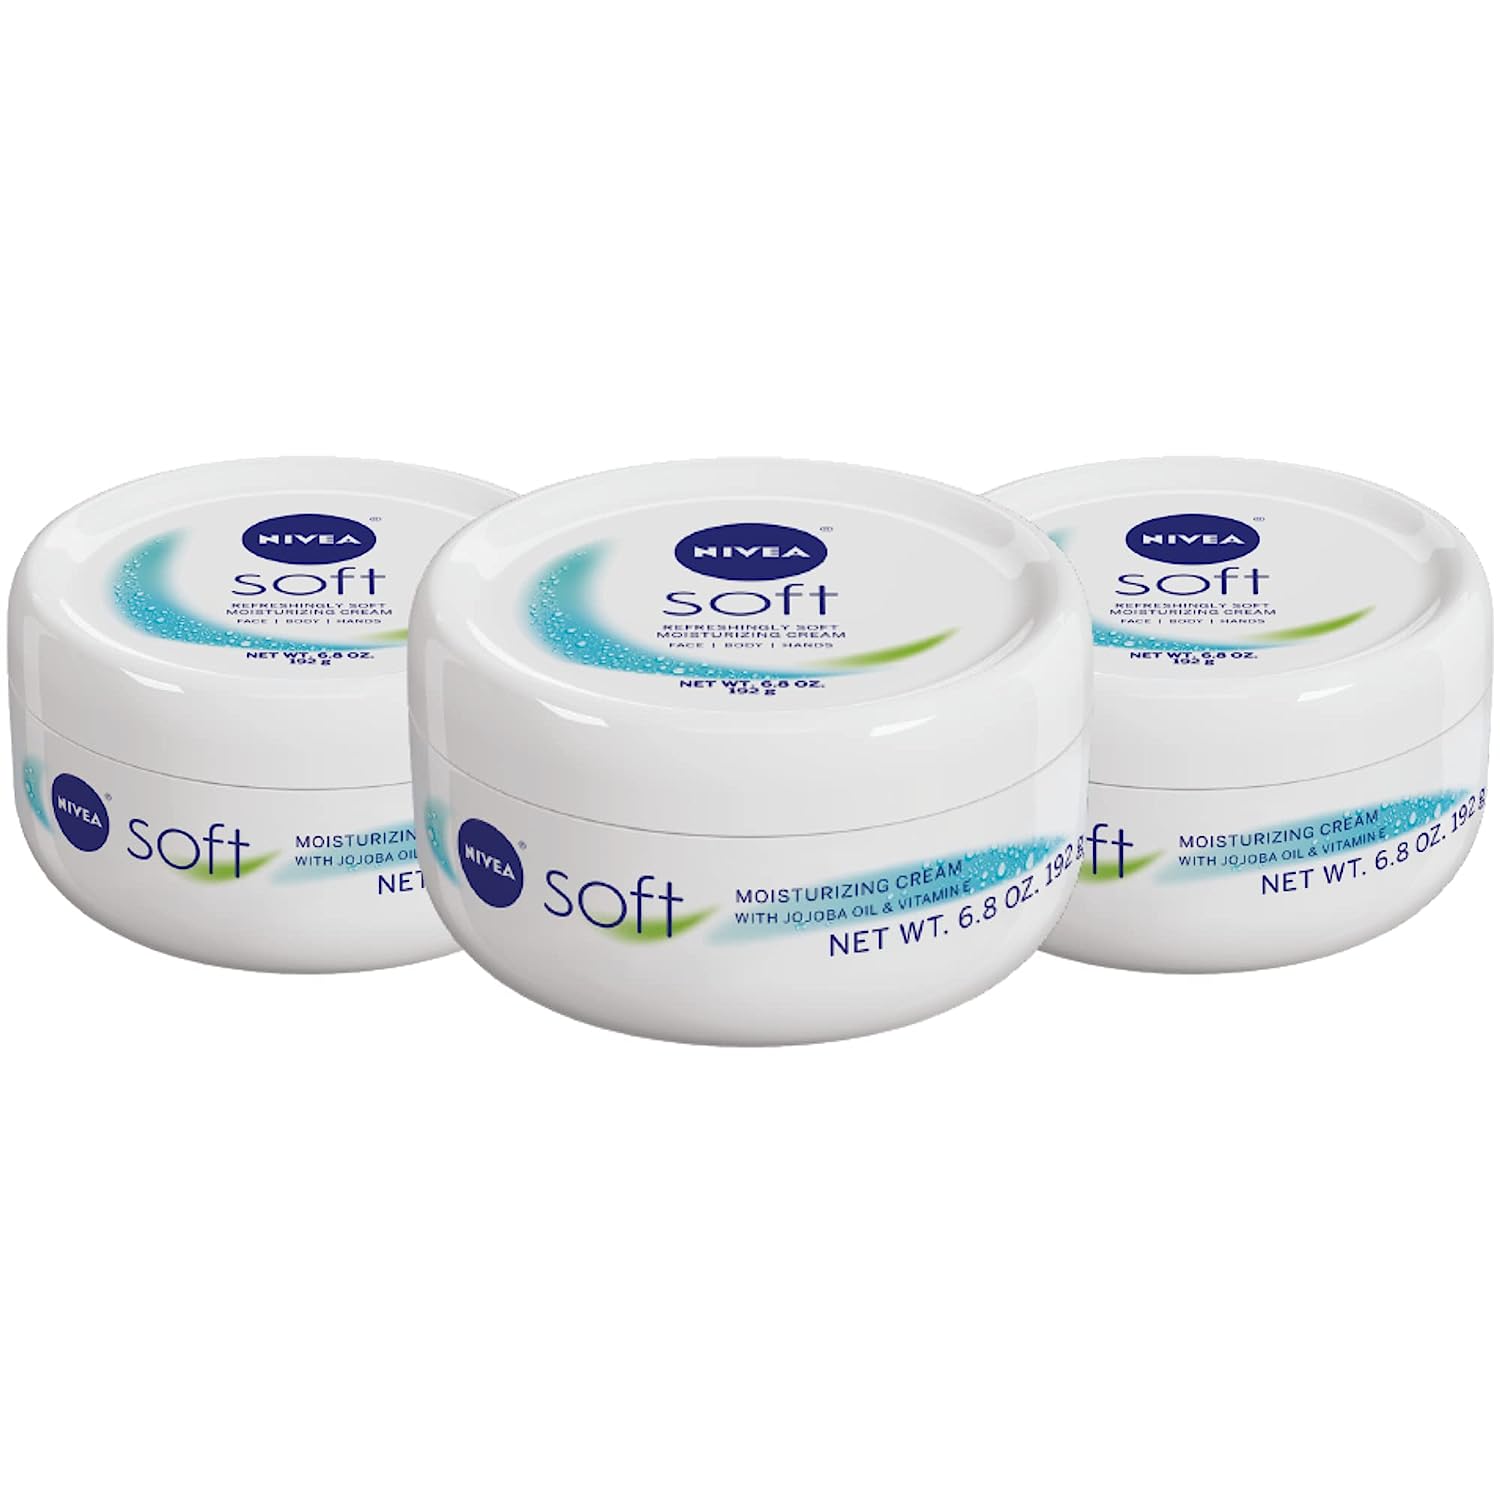 3-Pack 6.8oz NIVEA Soft Moisturizing Creme $9.86 ($3.29 each) w/ S&S + Free Shipping w/ Prime or on $25+